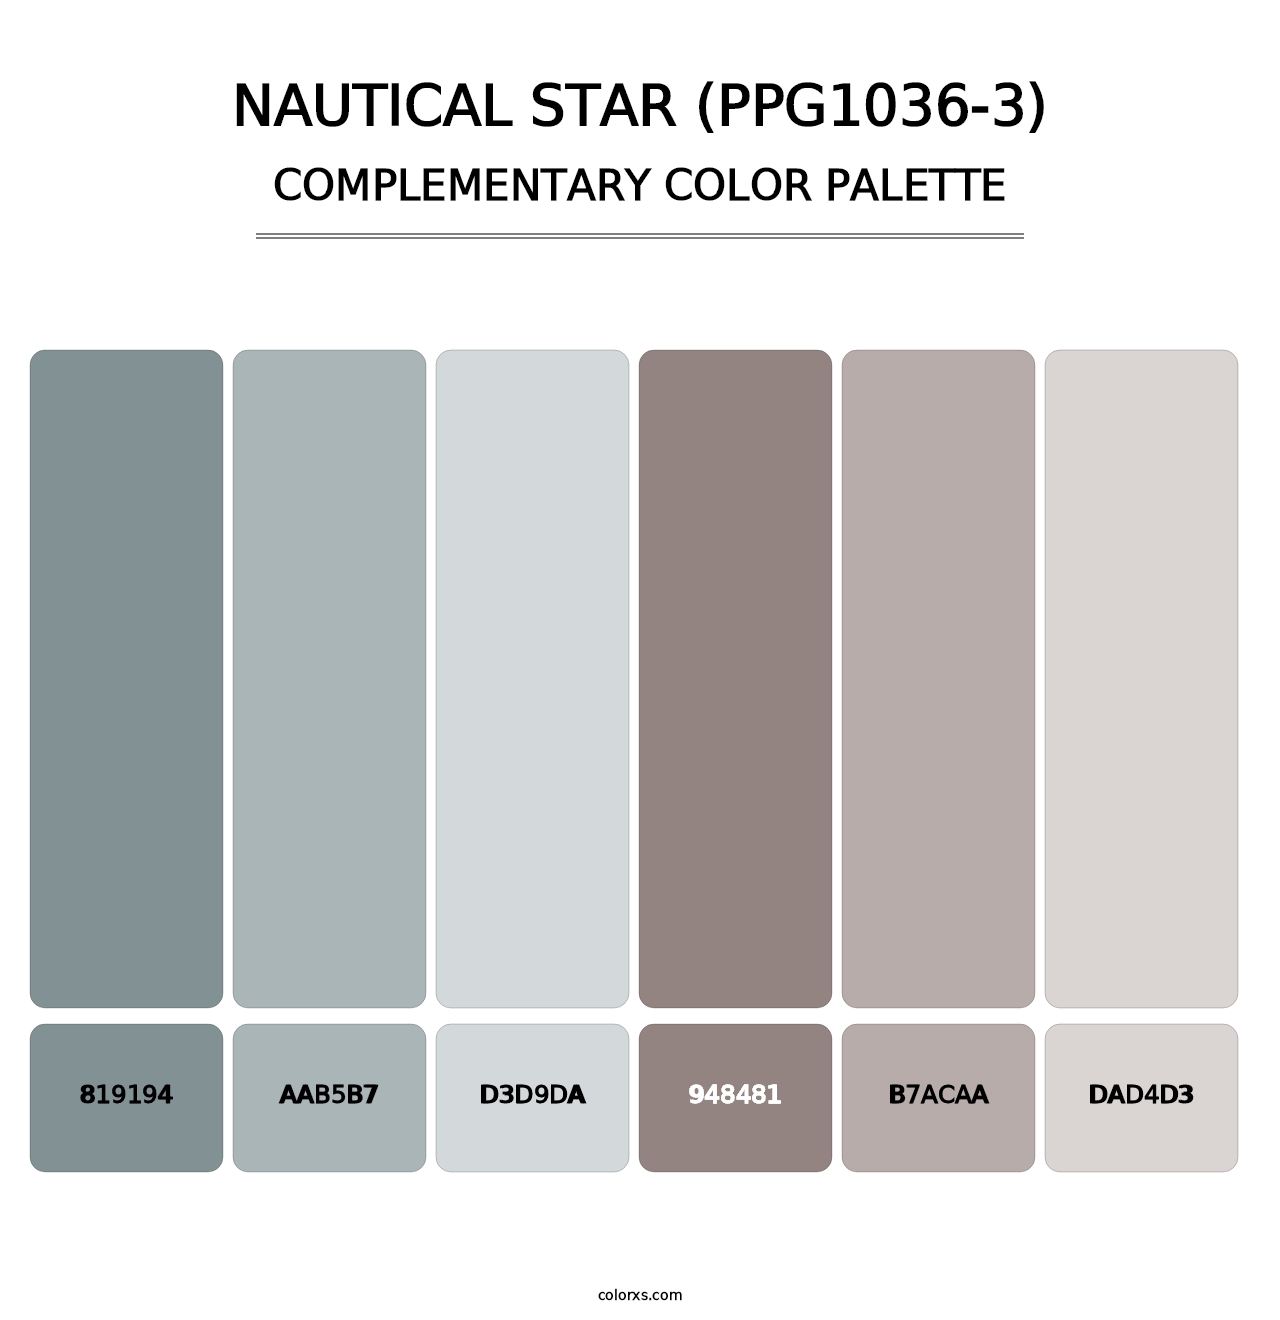 Nautical Star (PPG1036-3) - Complementary Color Palette